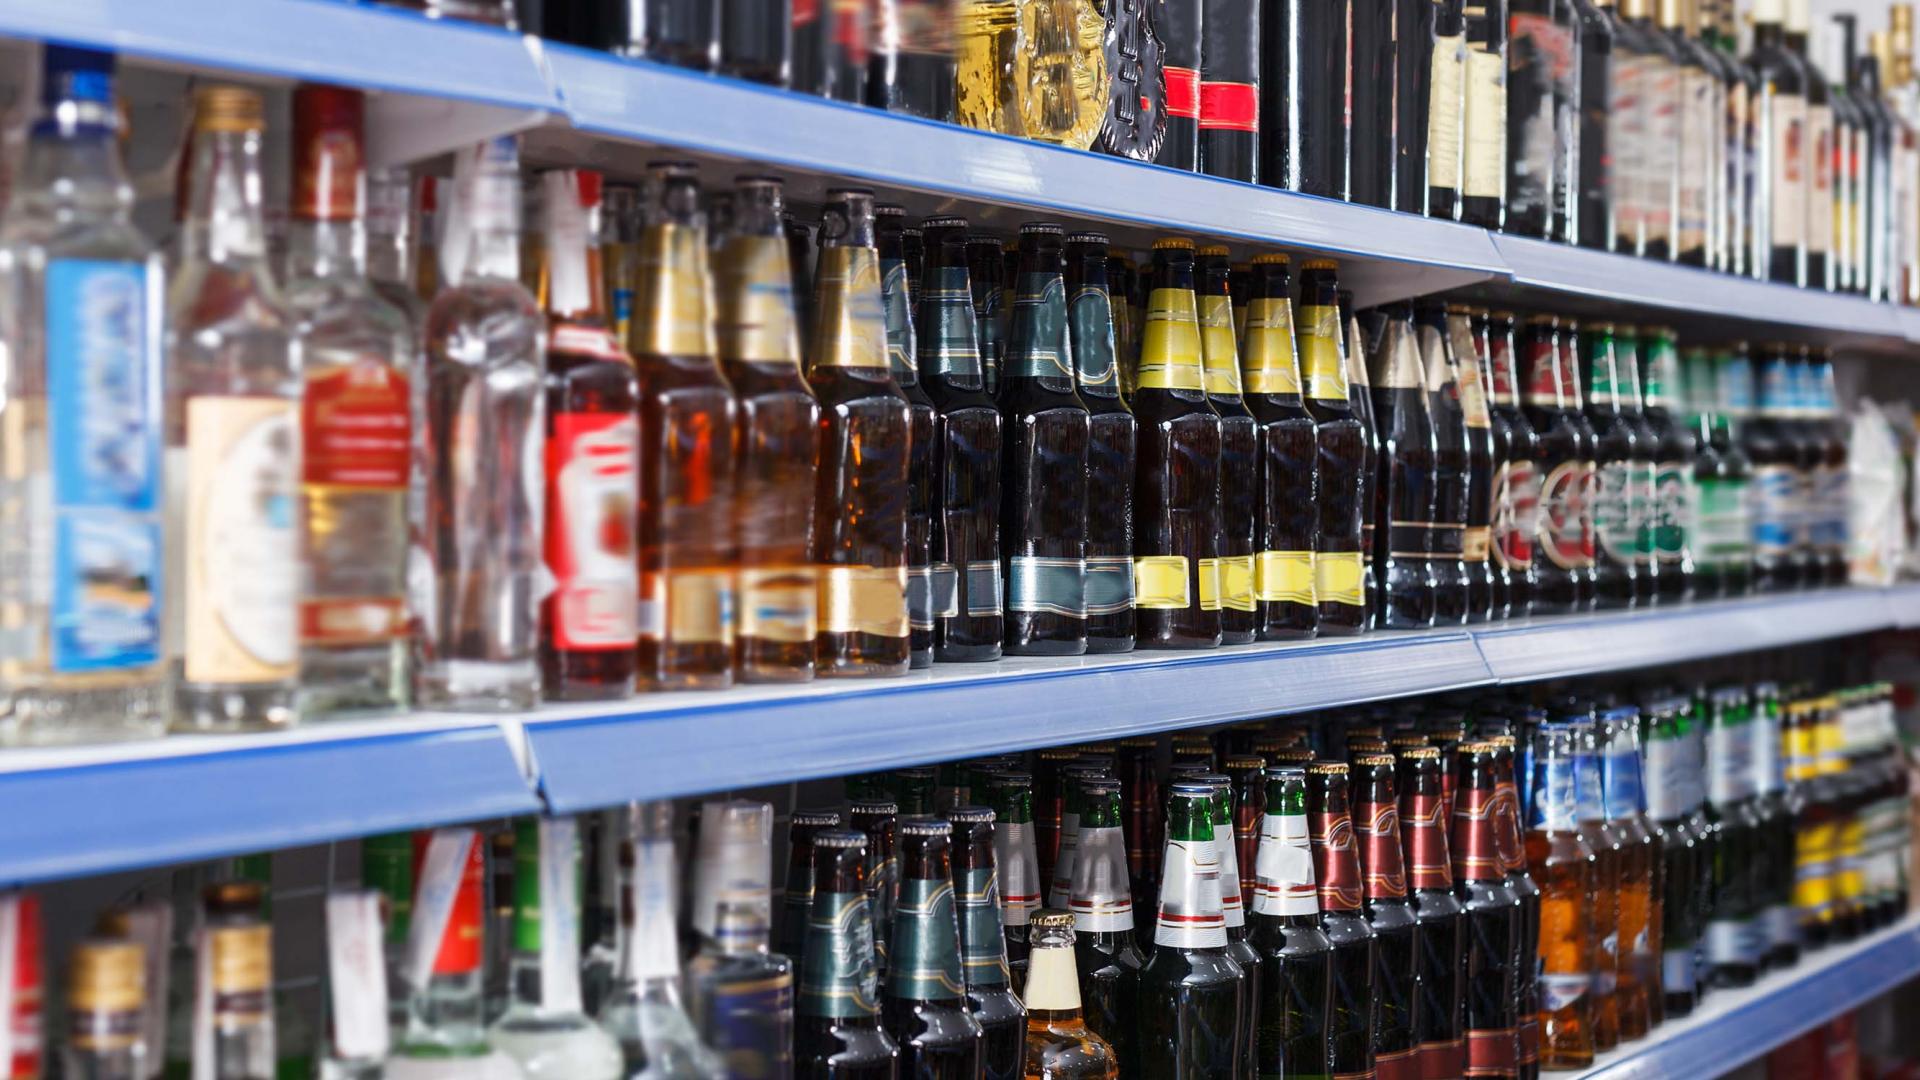 Alcohol in a supermarket